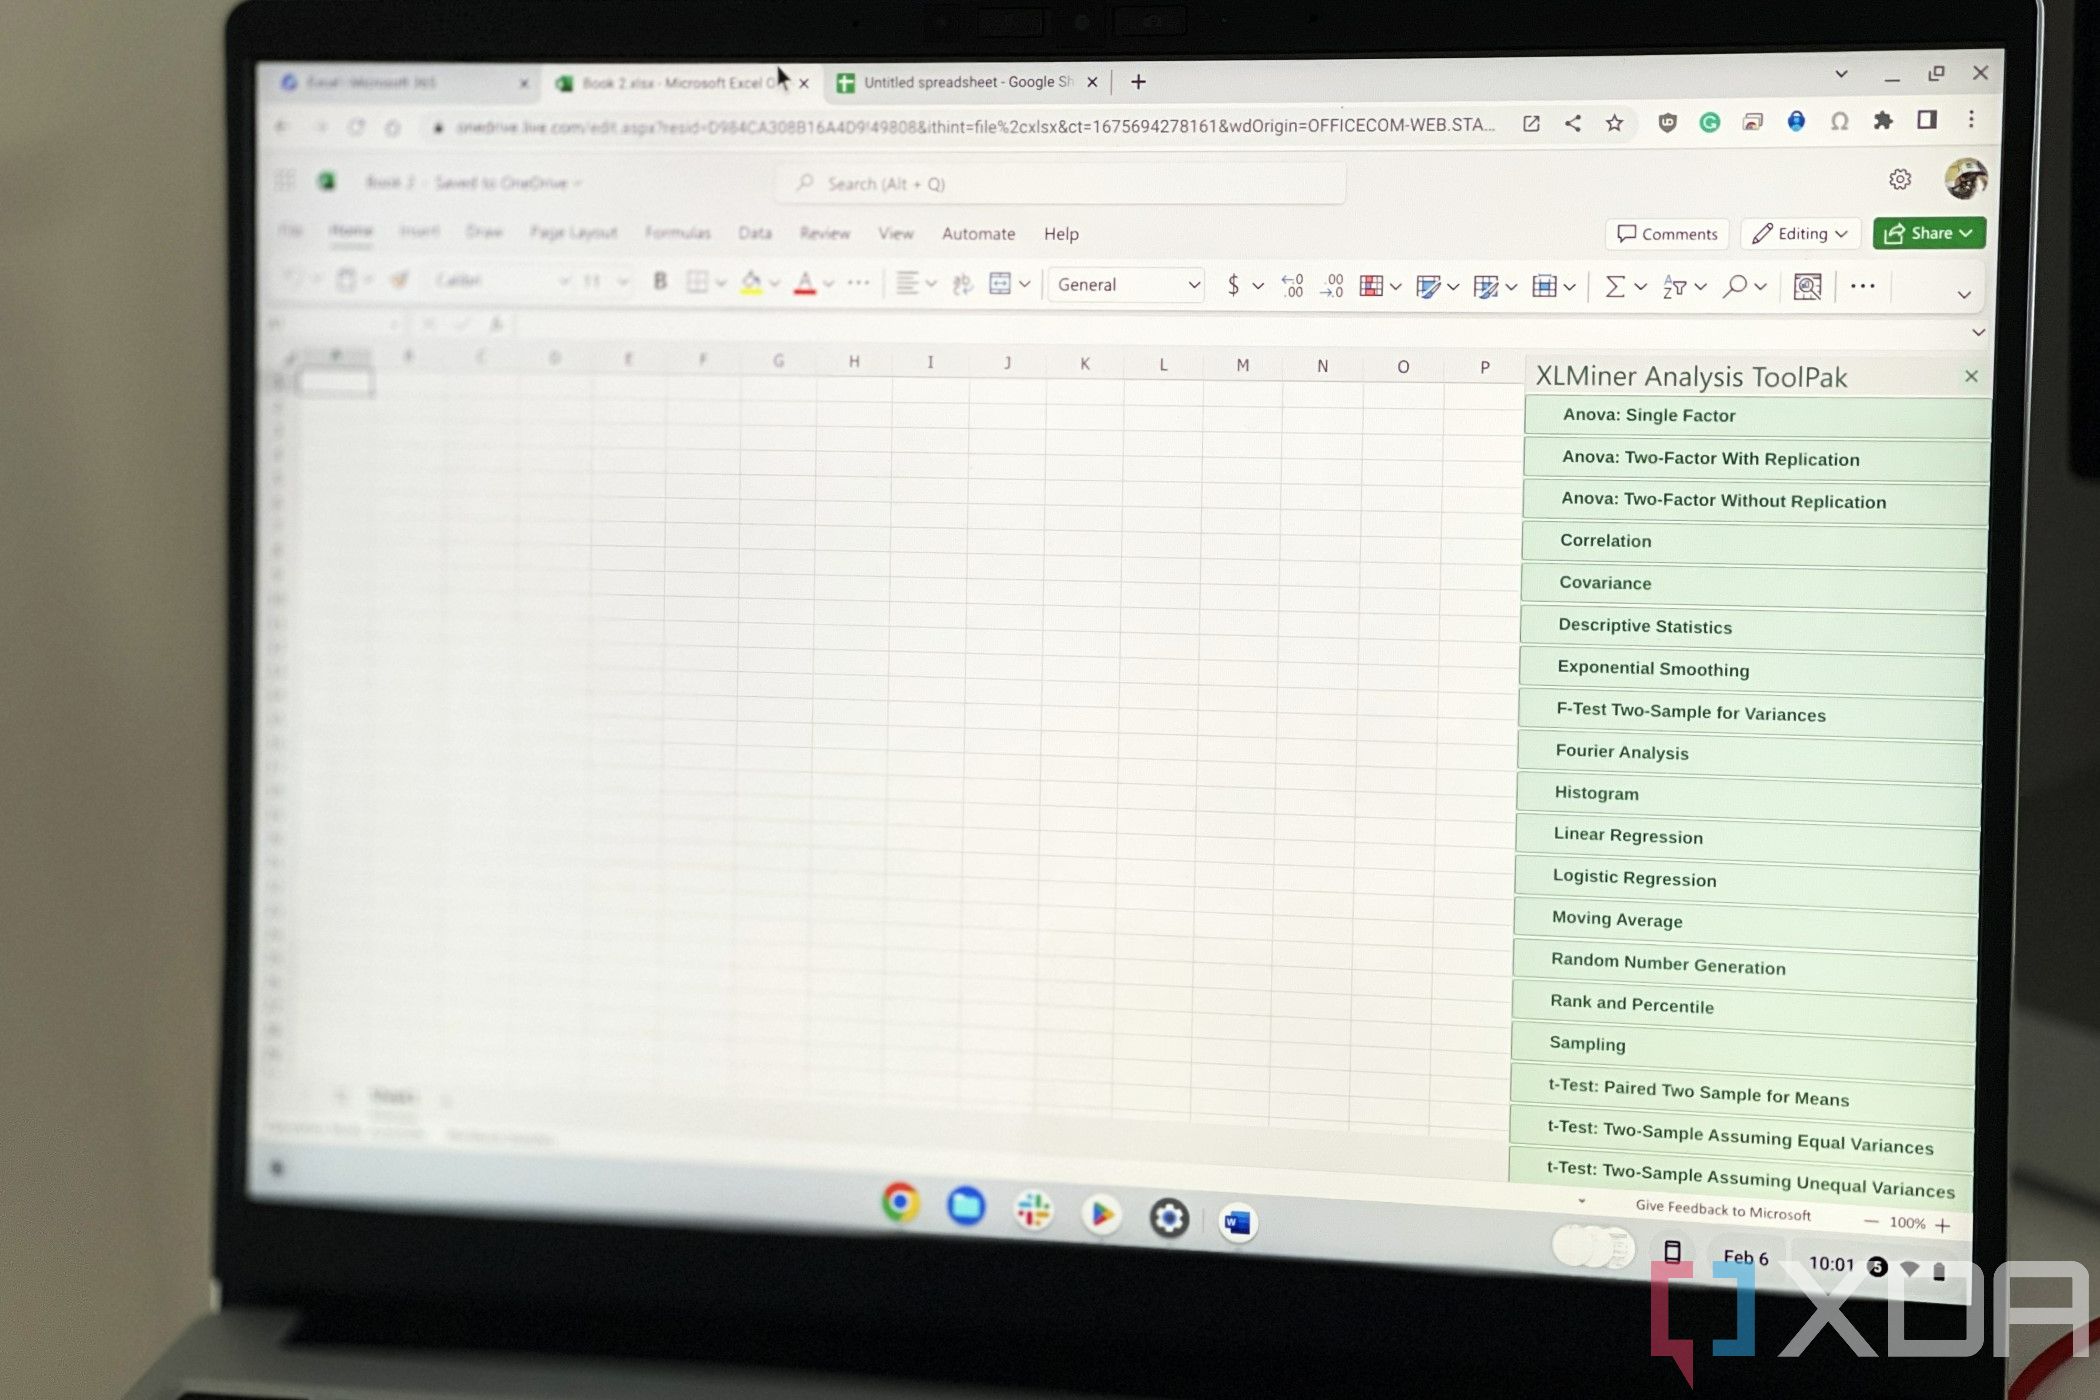 How to use Excel's Data Analysis Toolpak on a Chromebook